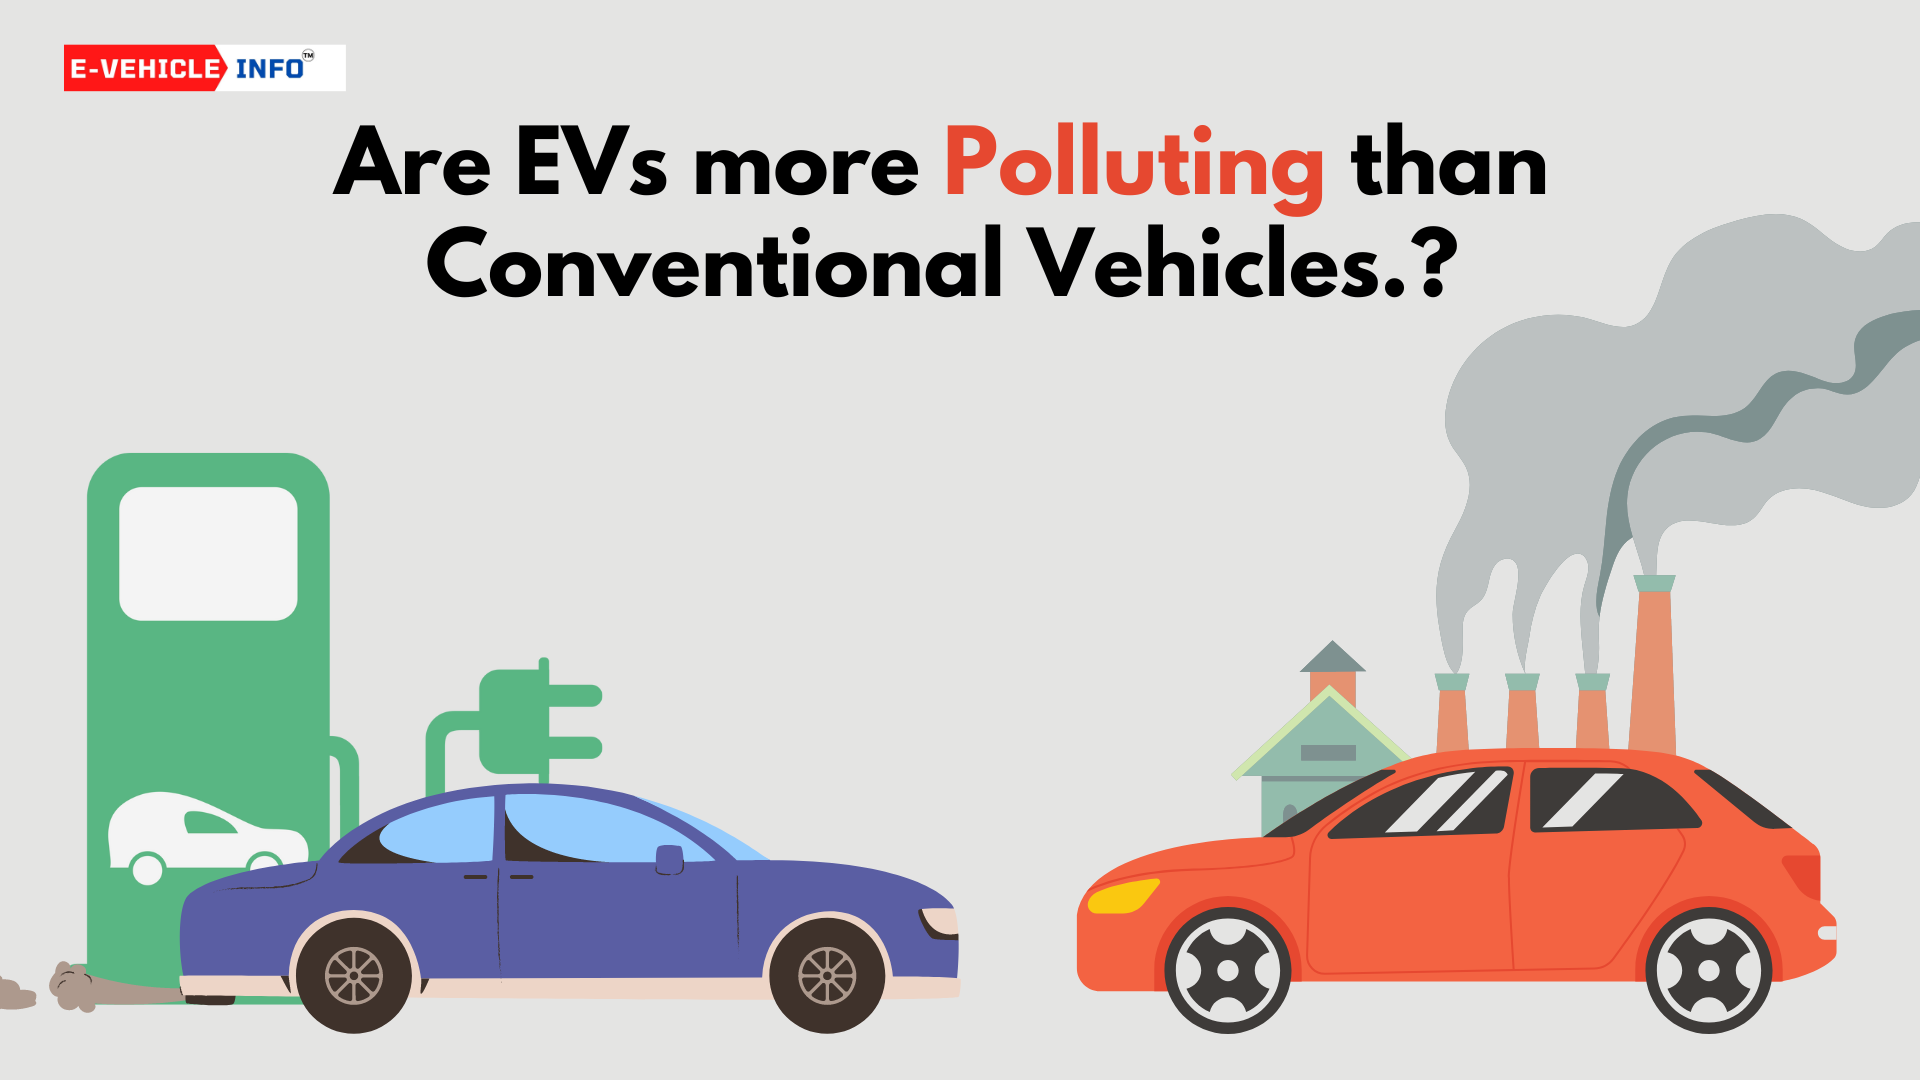 Are EVs more polluting than Conventional Vehicles?